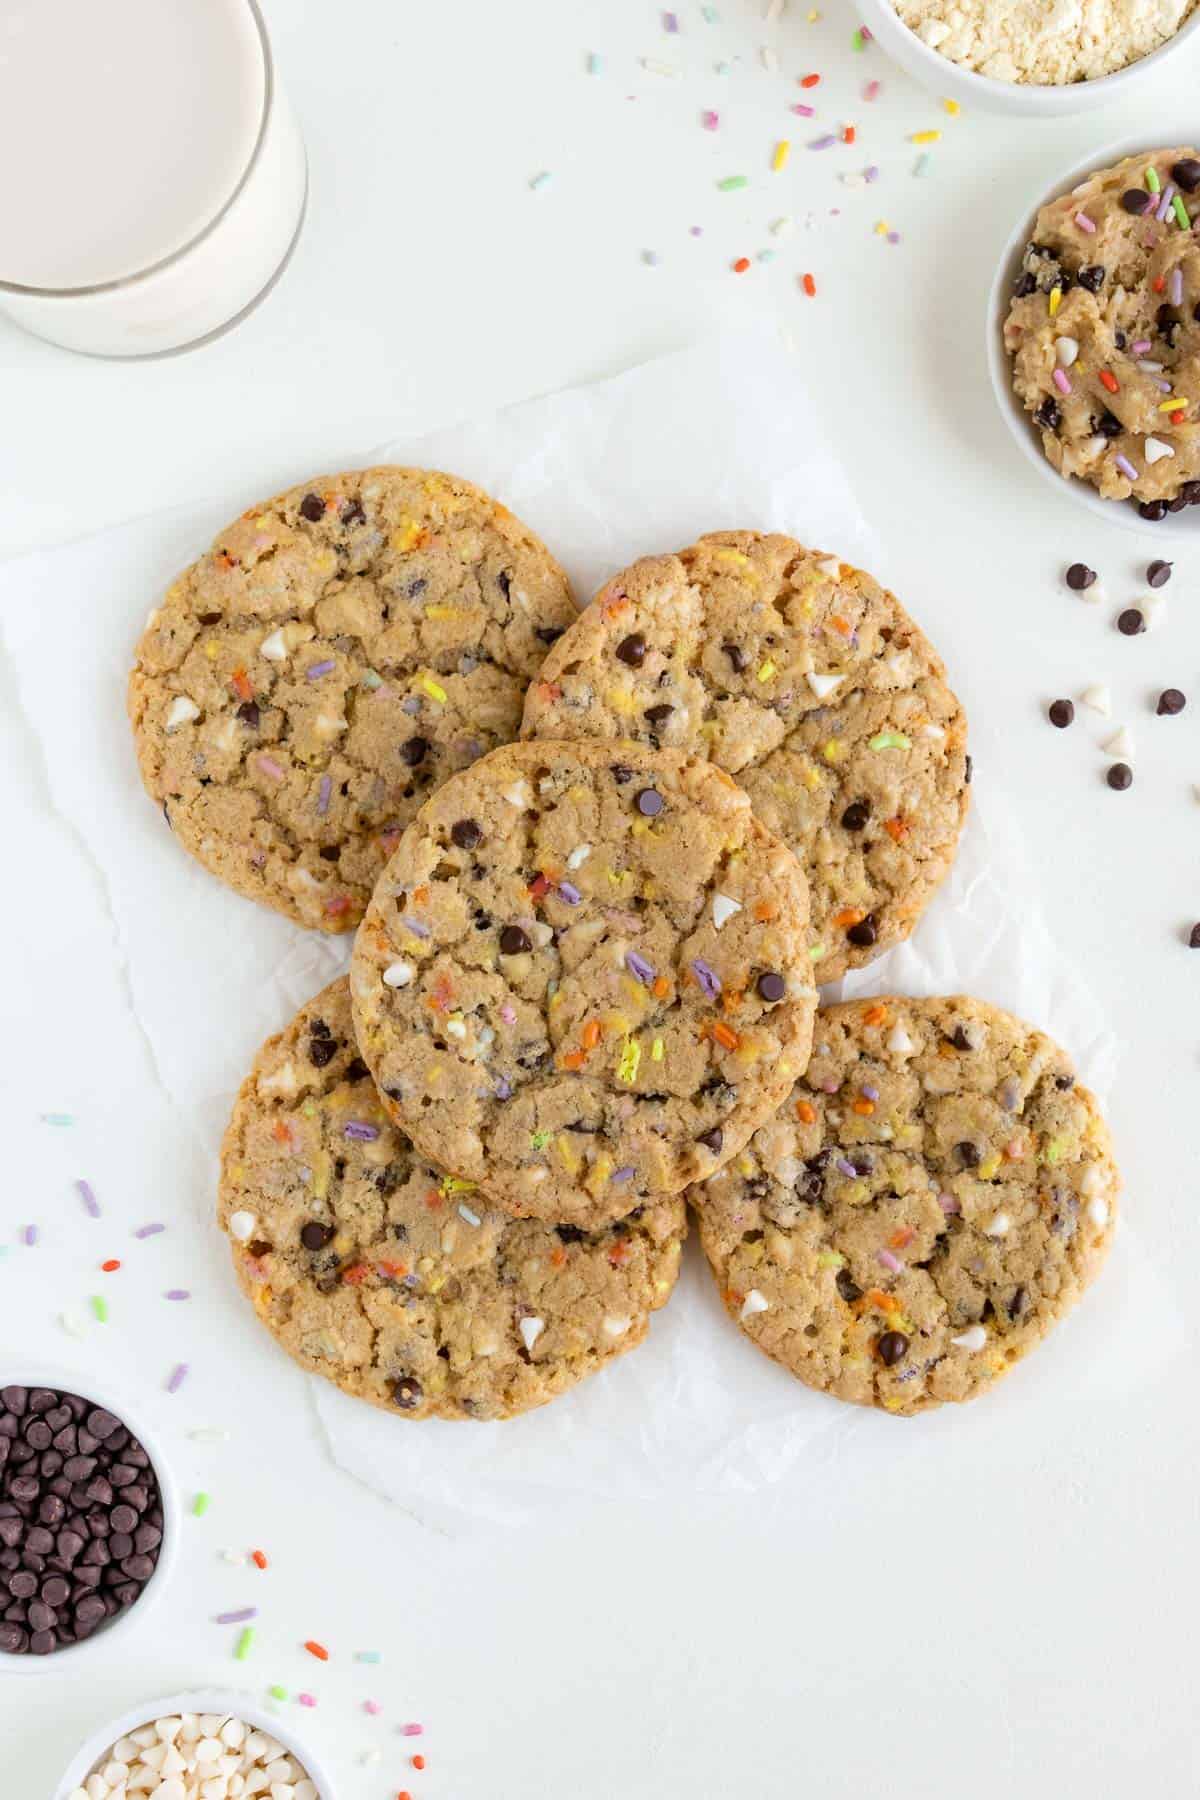 five vegan birthday cake cookies surrounded by chocolate chips, rainbow sprinkles, and white chocolate chips